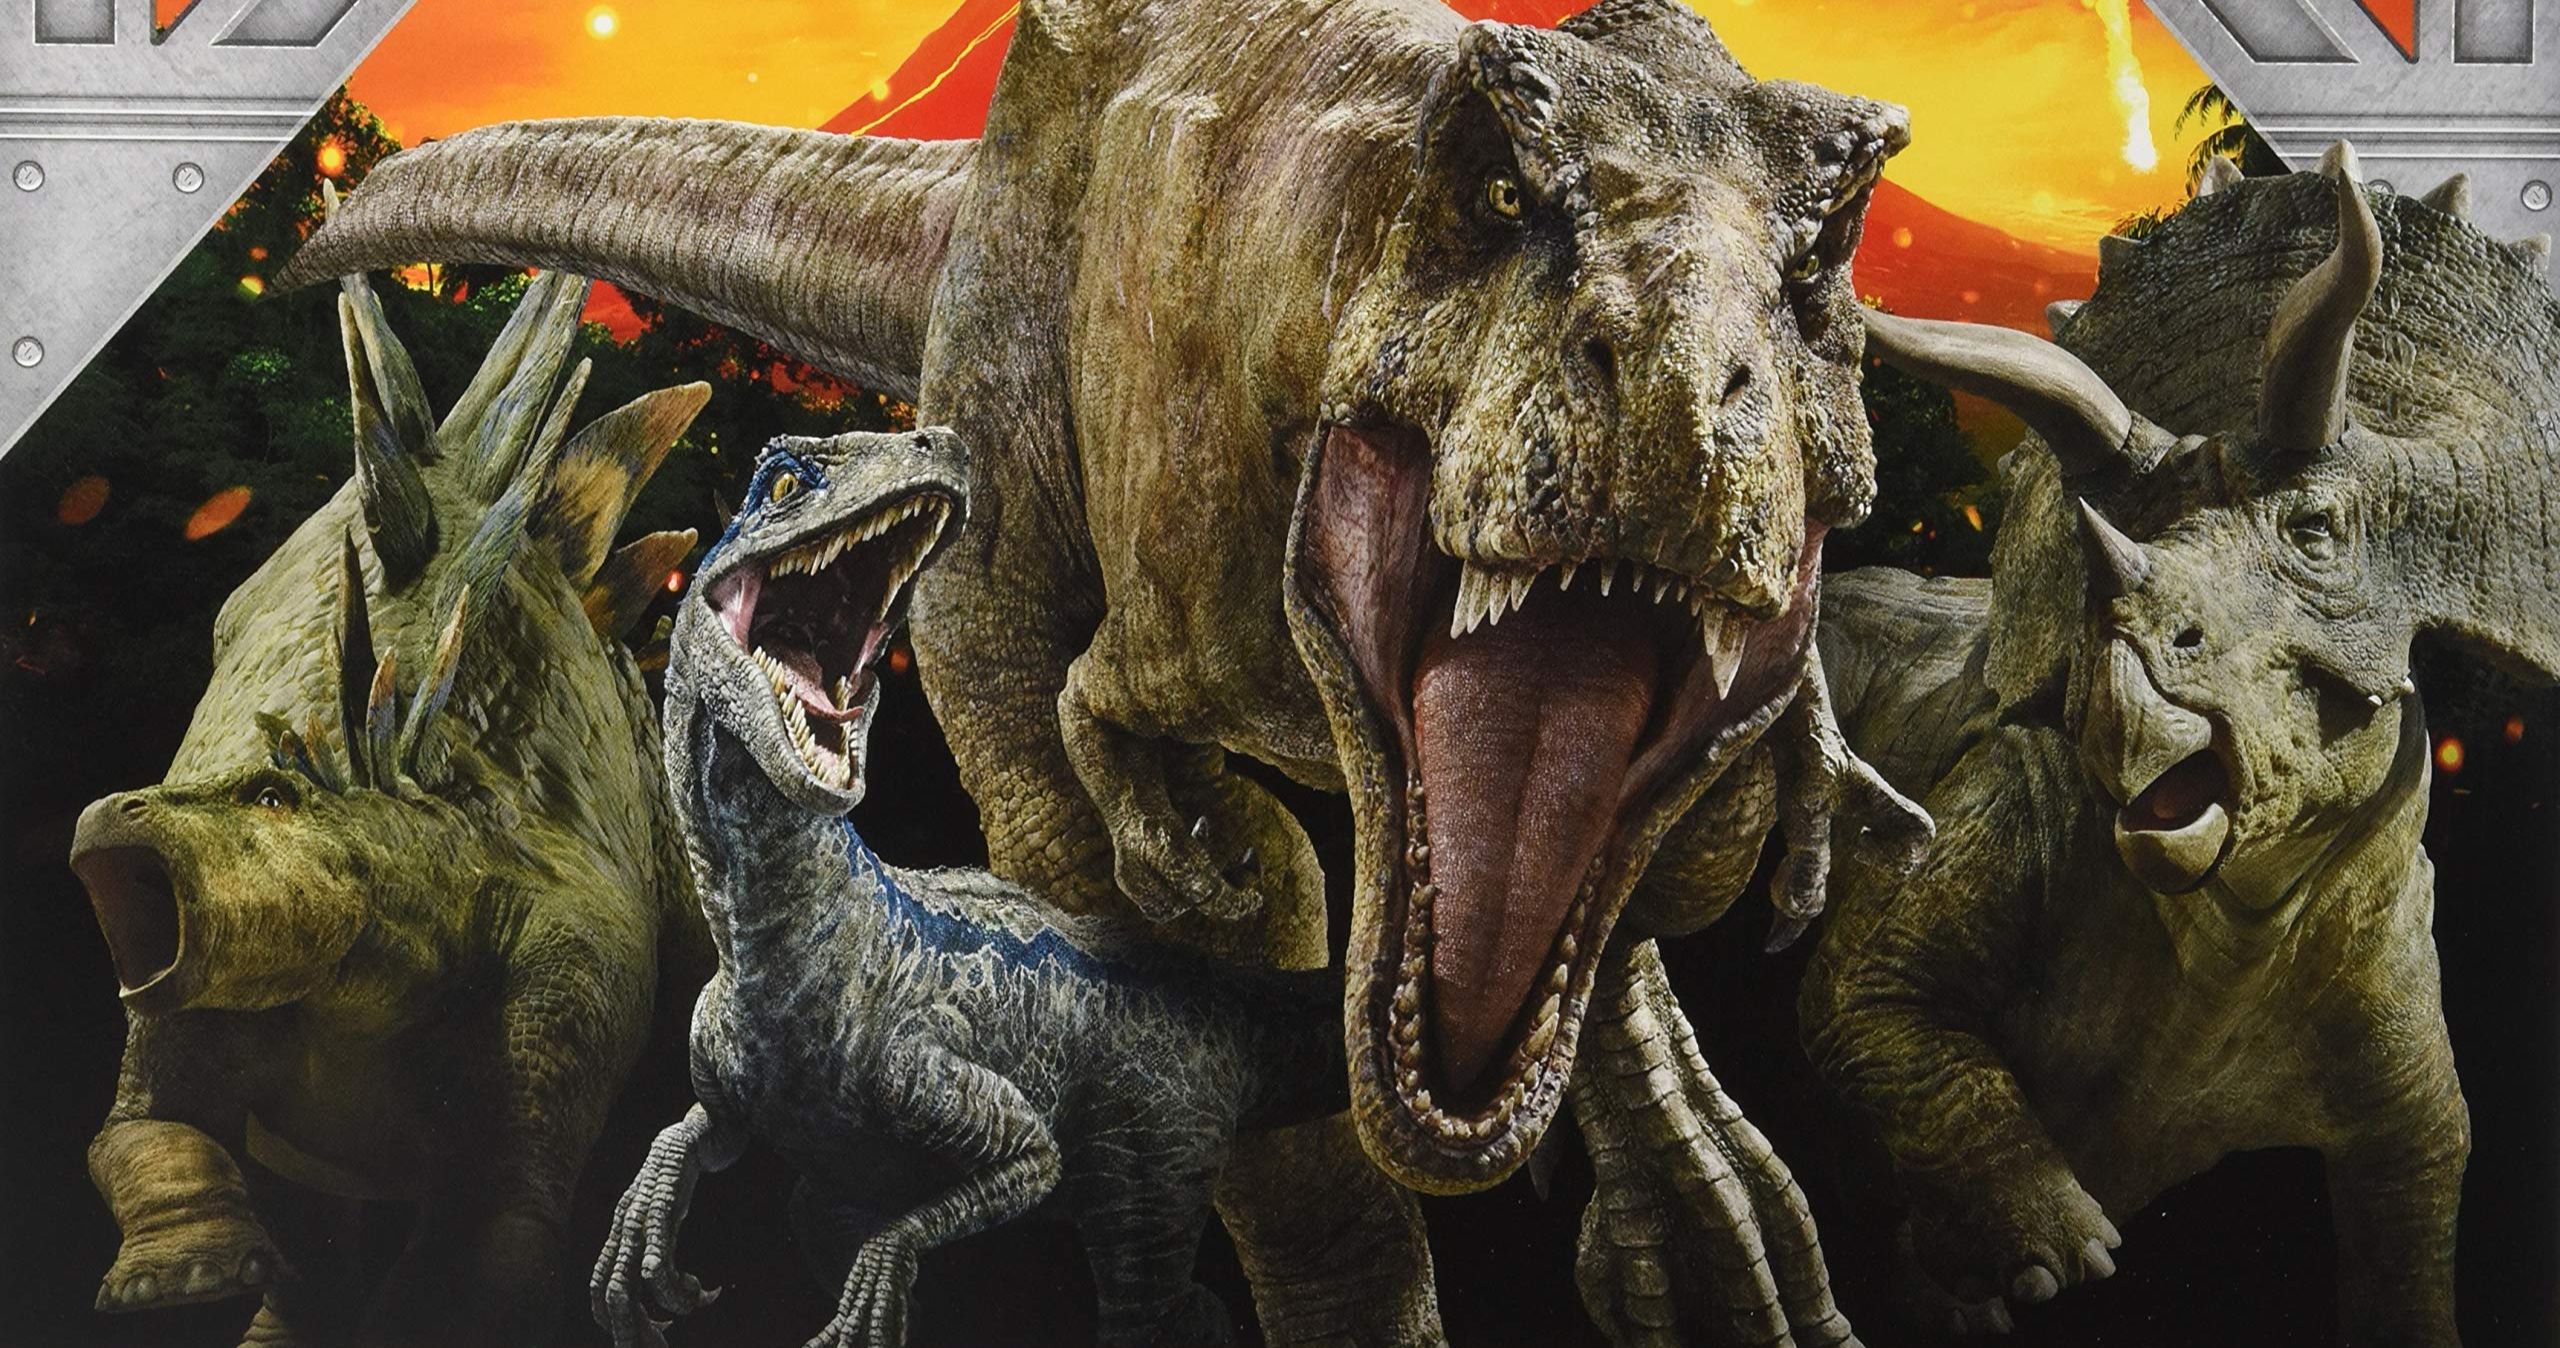 Jurassic World 3 Will Bring Entire Jurassic Park Franchise to a Close